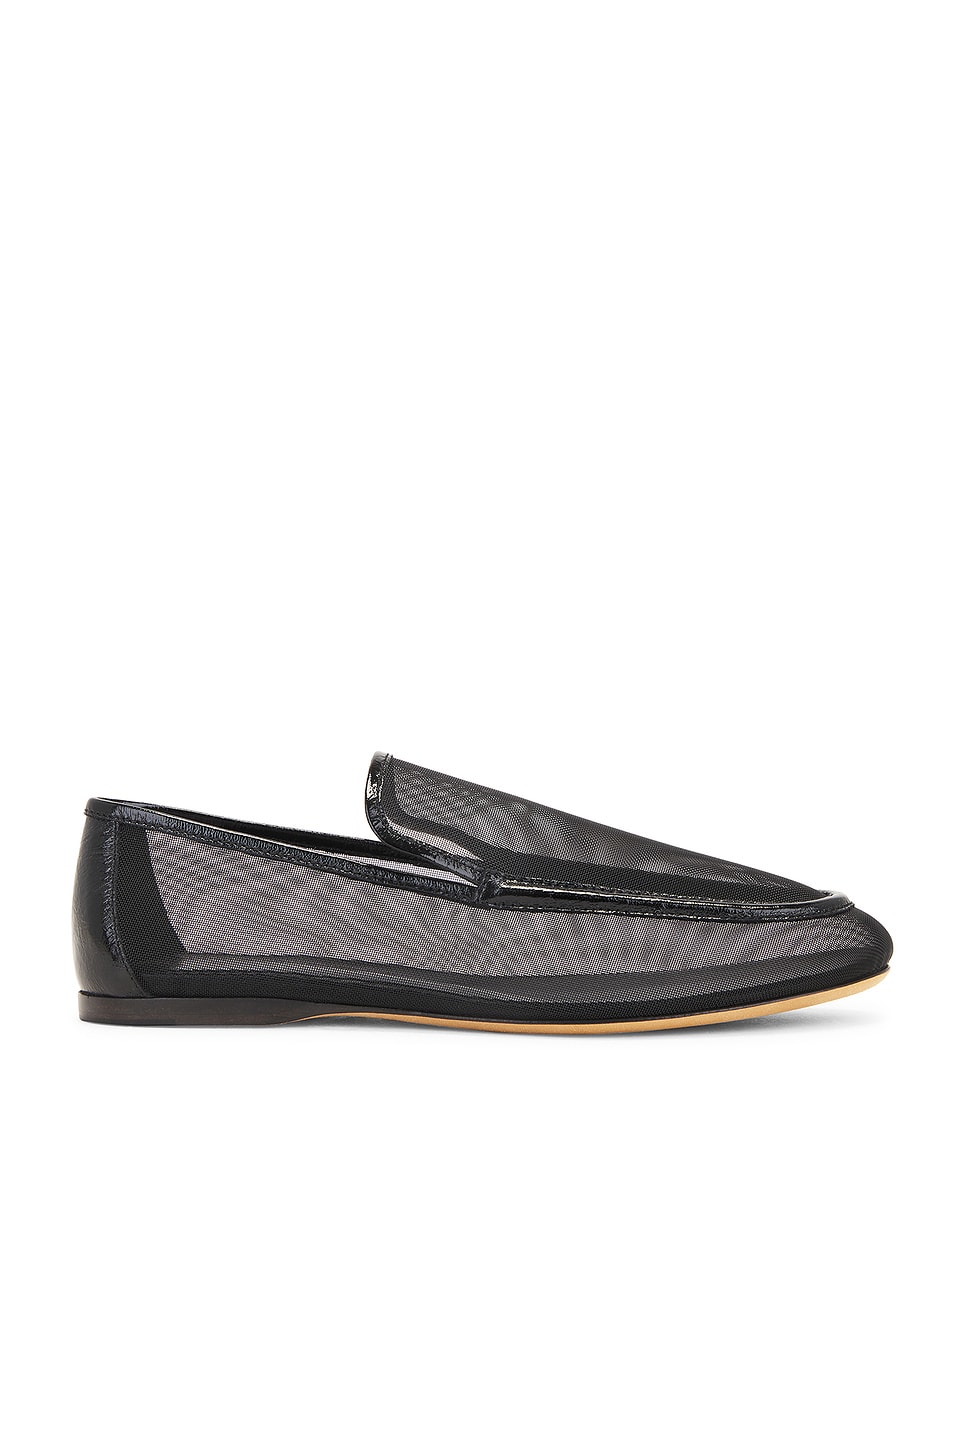 Alessia Loafer in Black